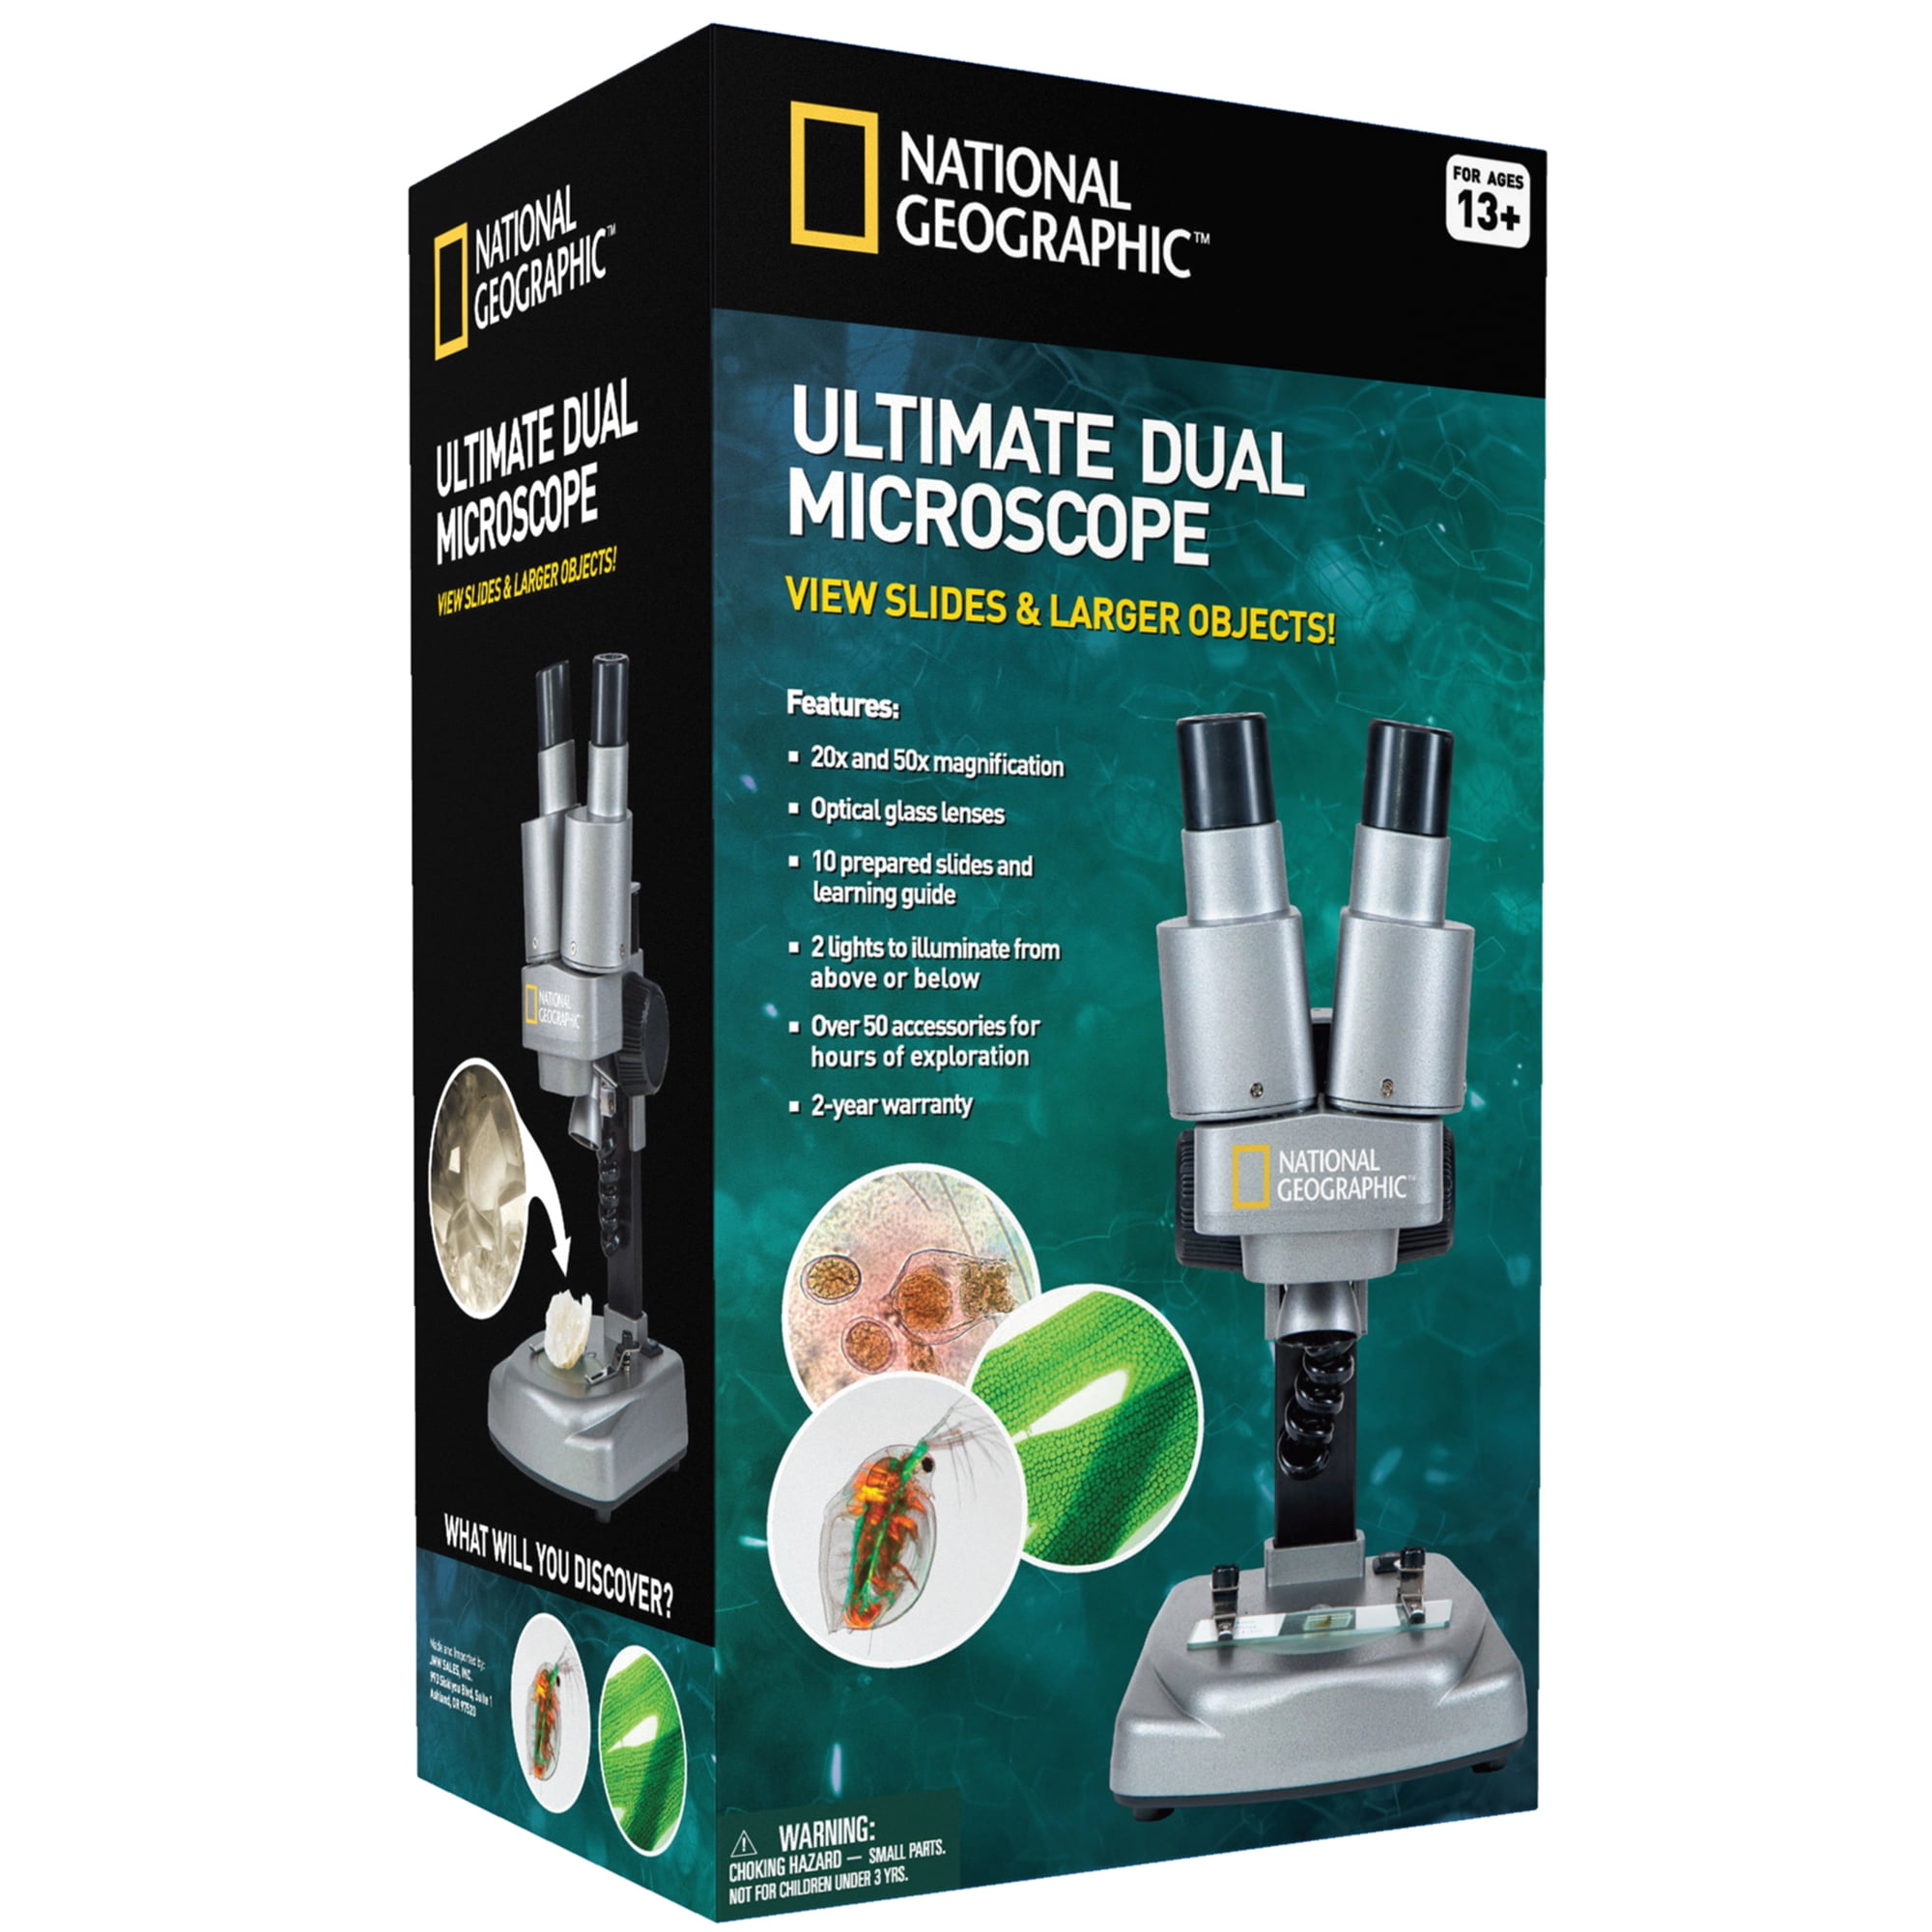 Microscope by National Geographic - Dual Purpose Illumination and More than  50 Accessories!